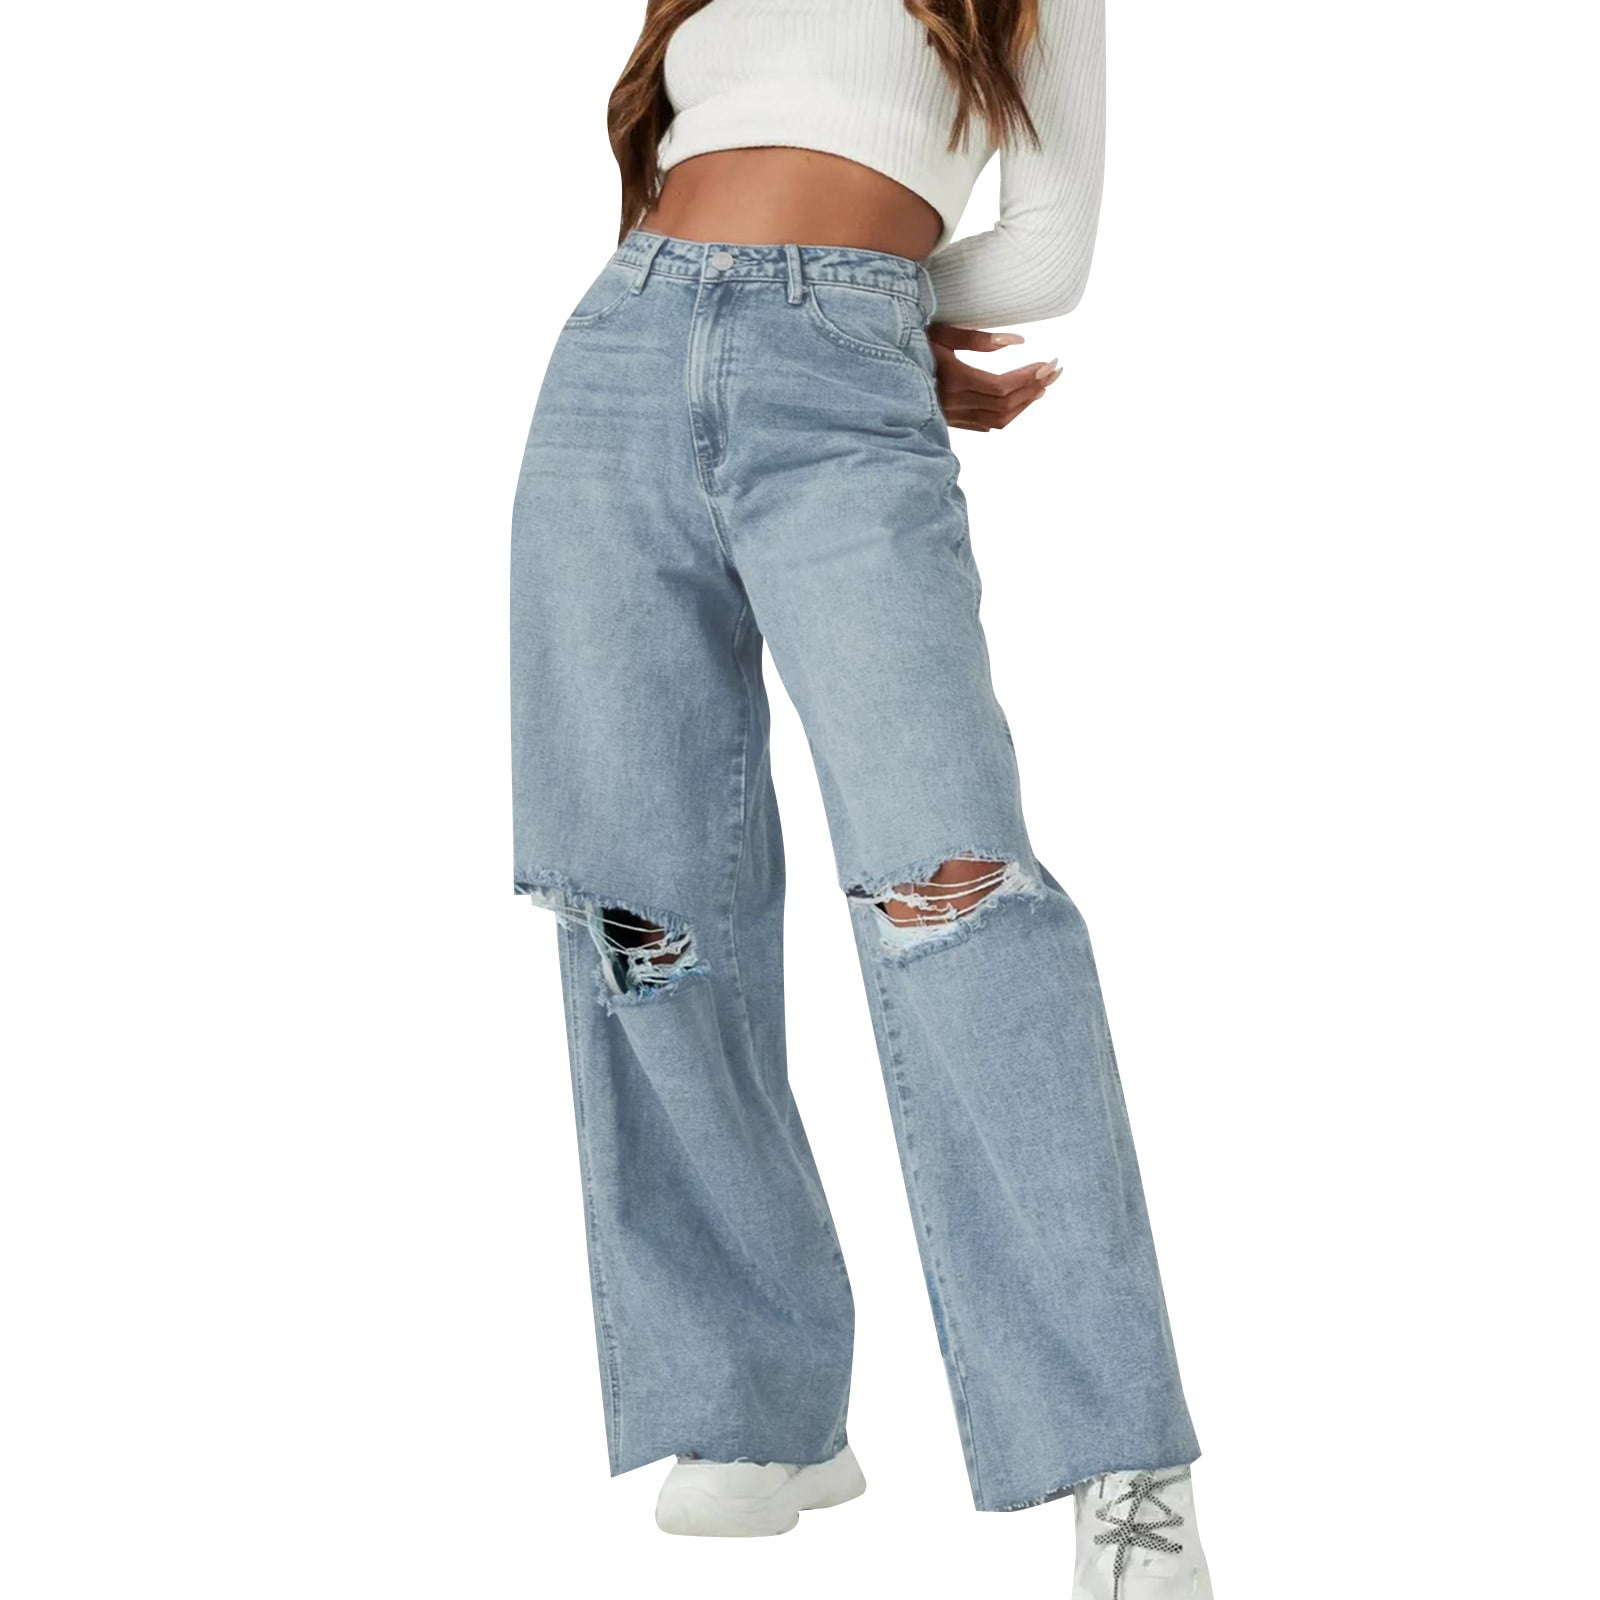 CBGELRT Trendy Jeans for Women High Waist Female Black Jeans for Women High  Waist Womens Wide Leg Baggy Jeans Skater Jeans High Waisted Ripped Denim